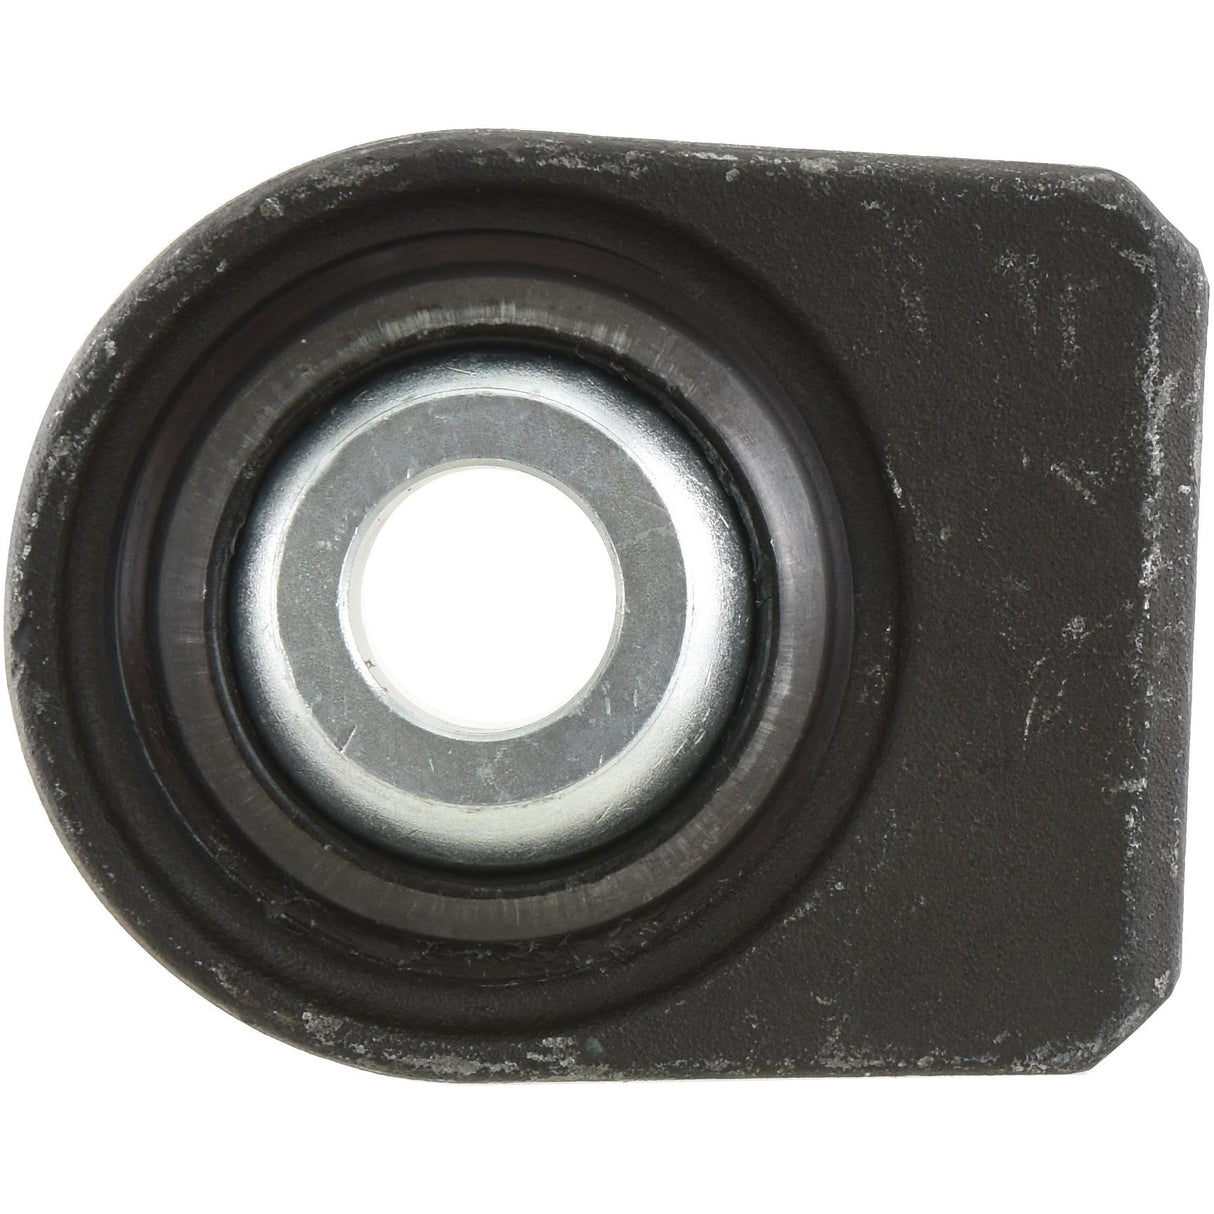 Lower Link Weld On Ball End (Cat. 2)
 - S.8532 - Farming Parts